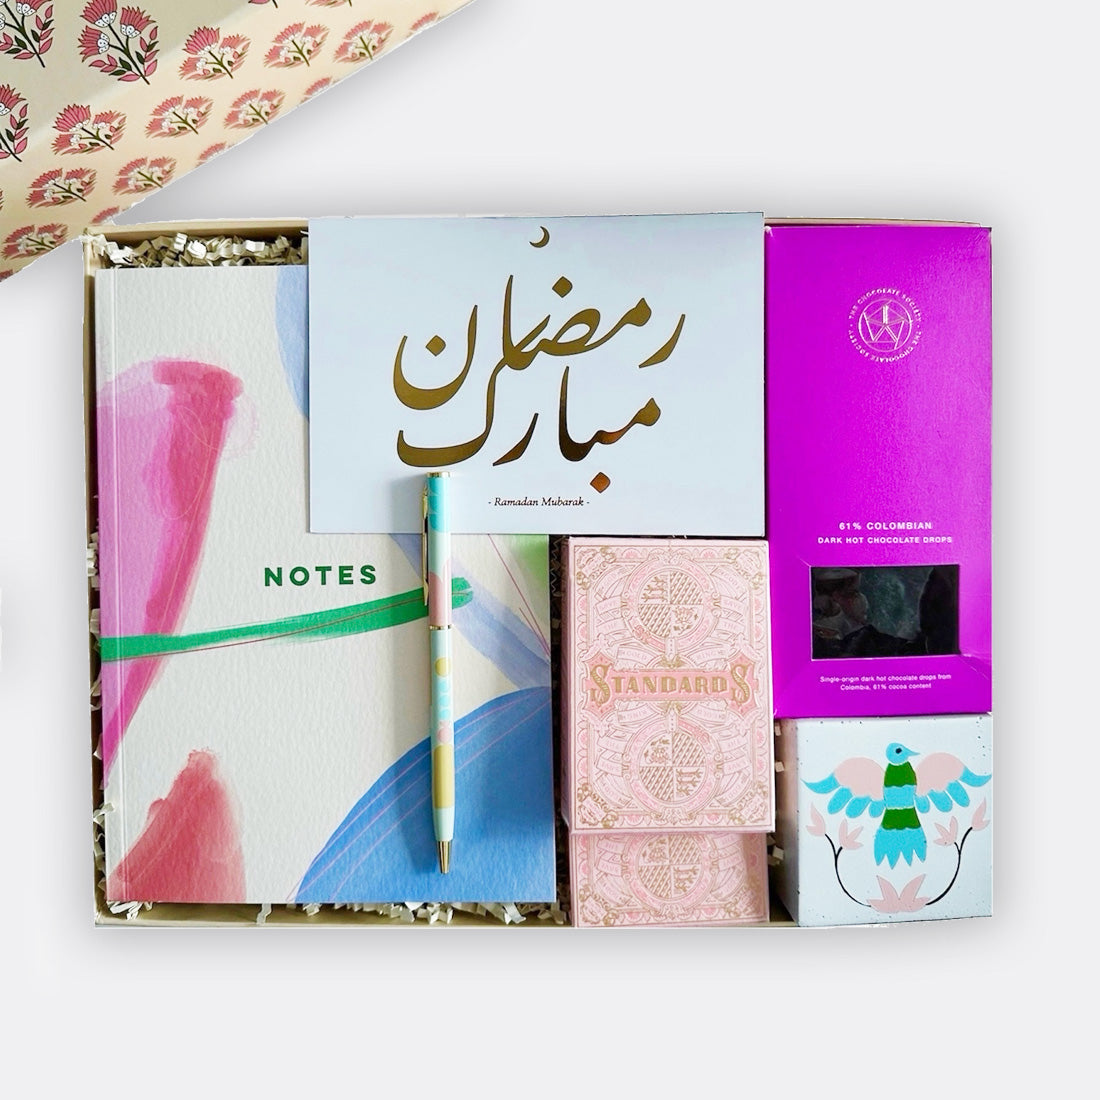 Otomi handpainted mabkhara, 2 Standard Pink Edition Playing Cards, Colombian Dark Hot Chocolate Drops, a Paint Brush Notebook, and a Candy Ballpoint Pen, shop the best ramadan gift gifts for her for him from Inna carton online store dubai, UAE!